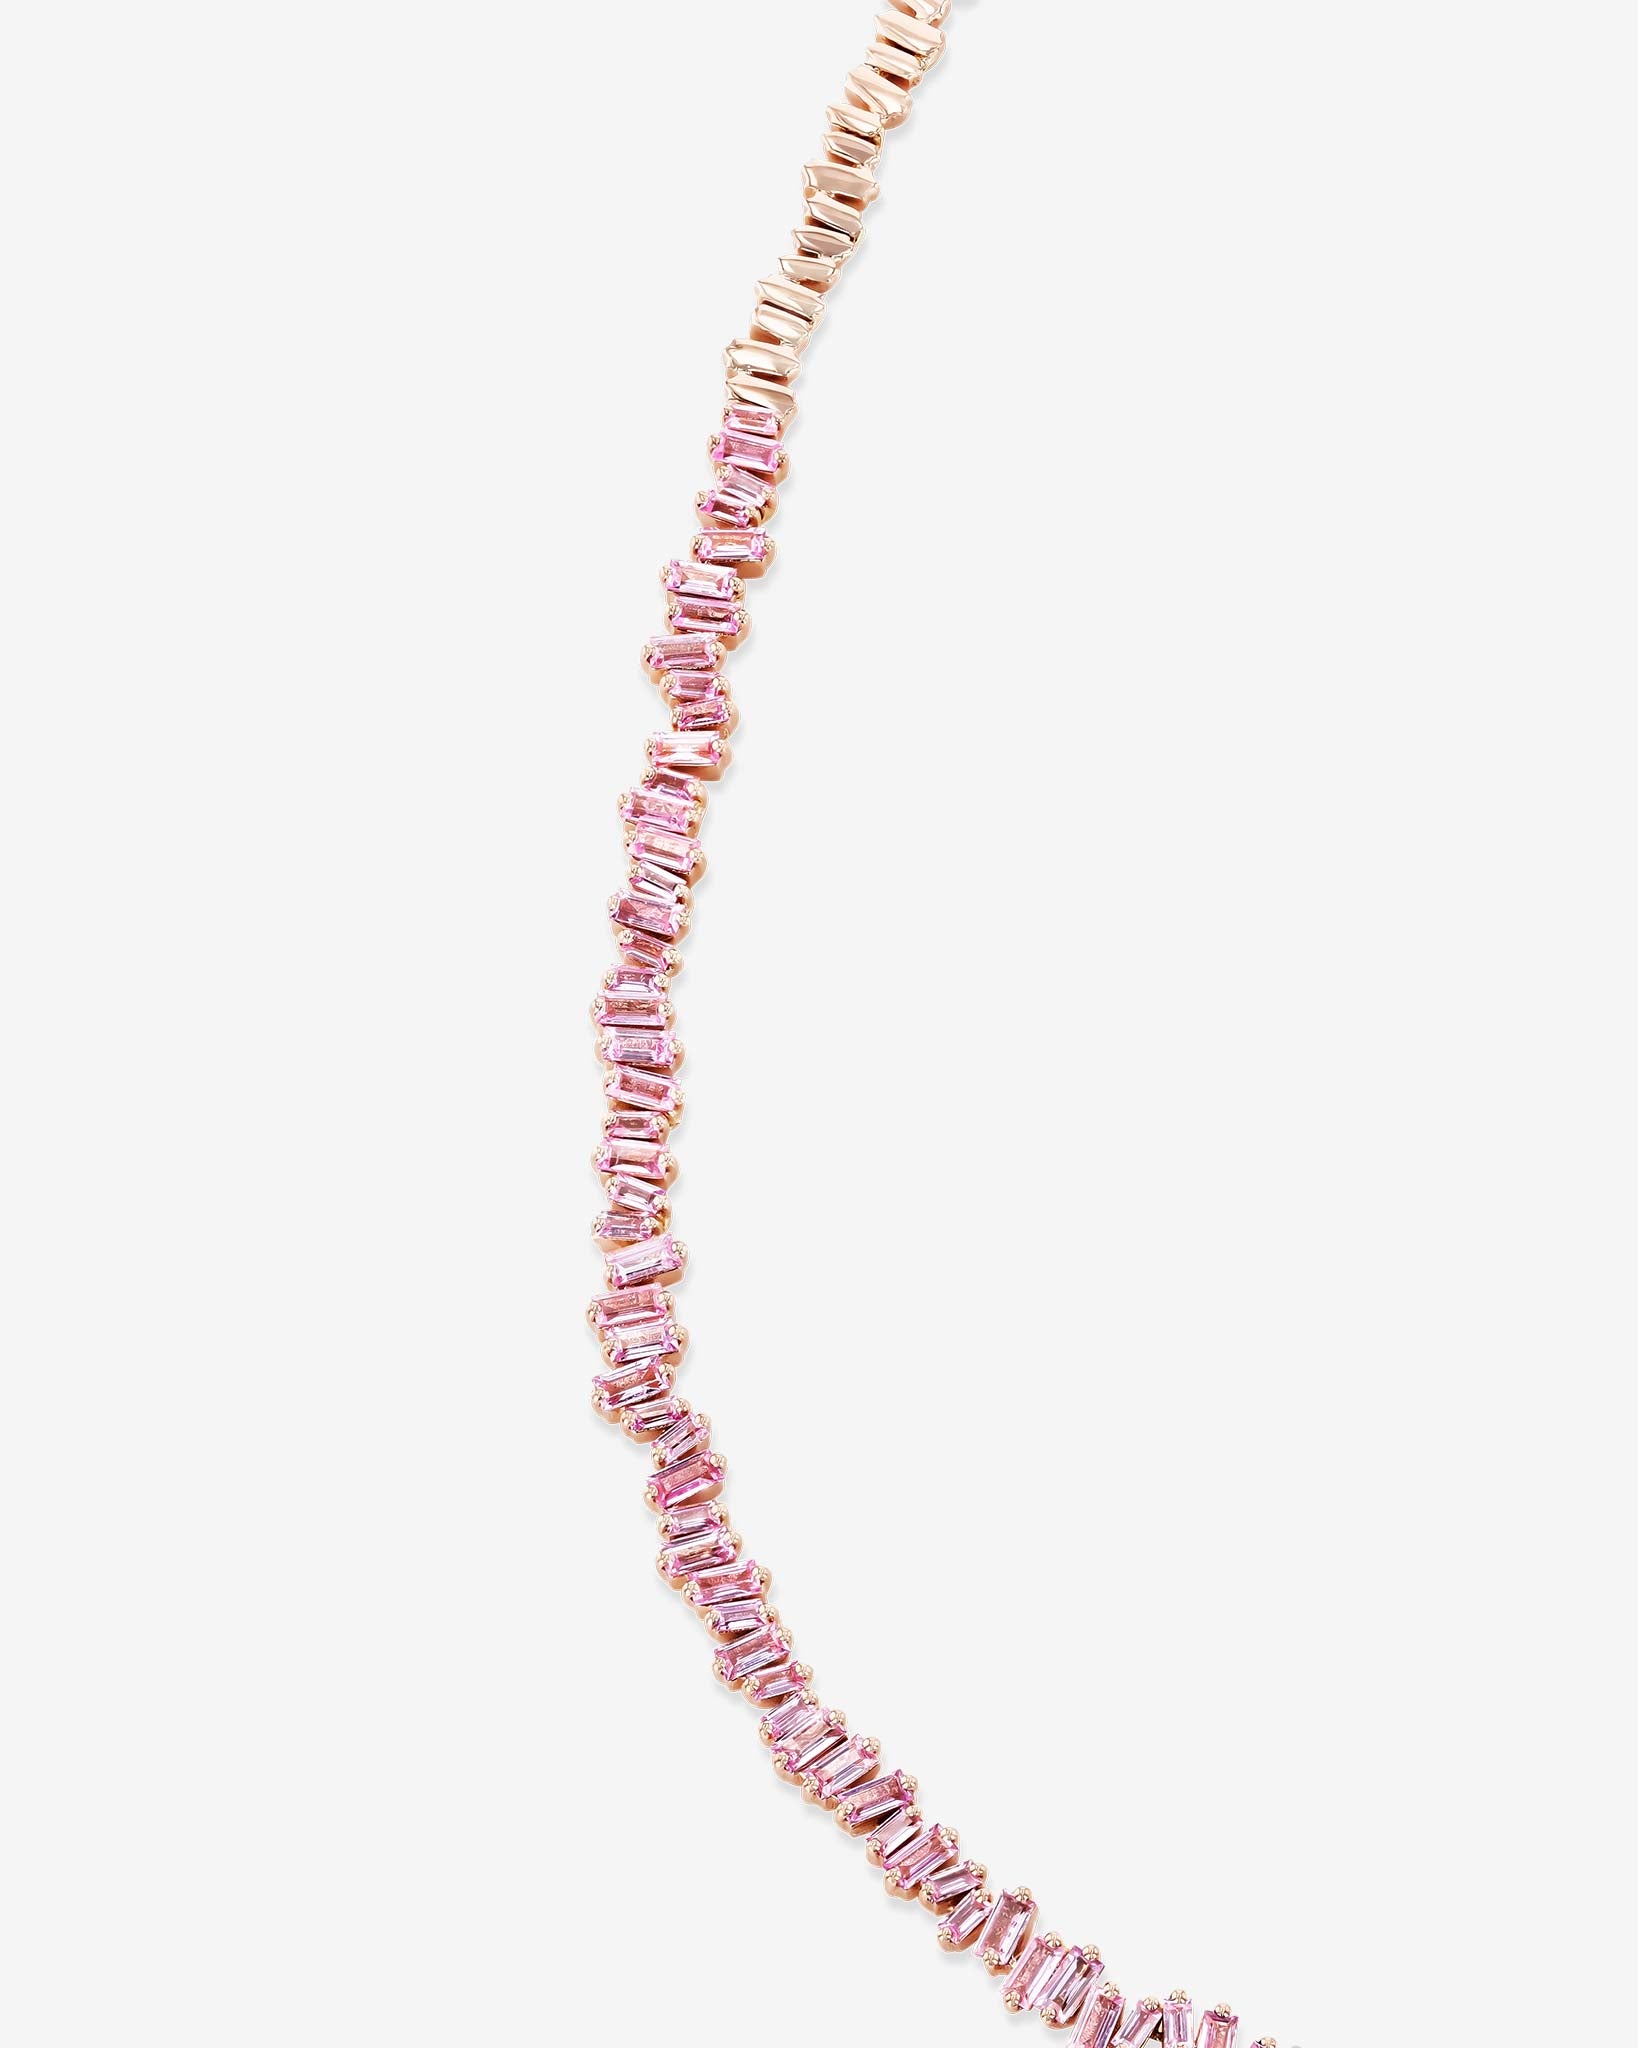 Suzanne Kalan Bold Pink Sapphire Tennis Necklace in 18k rose gold